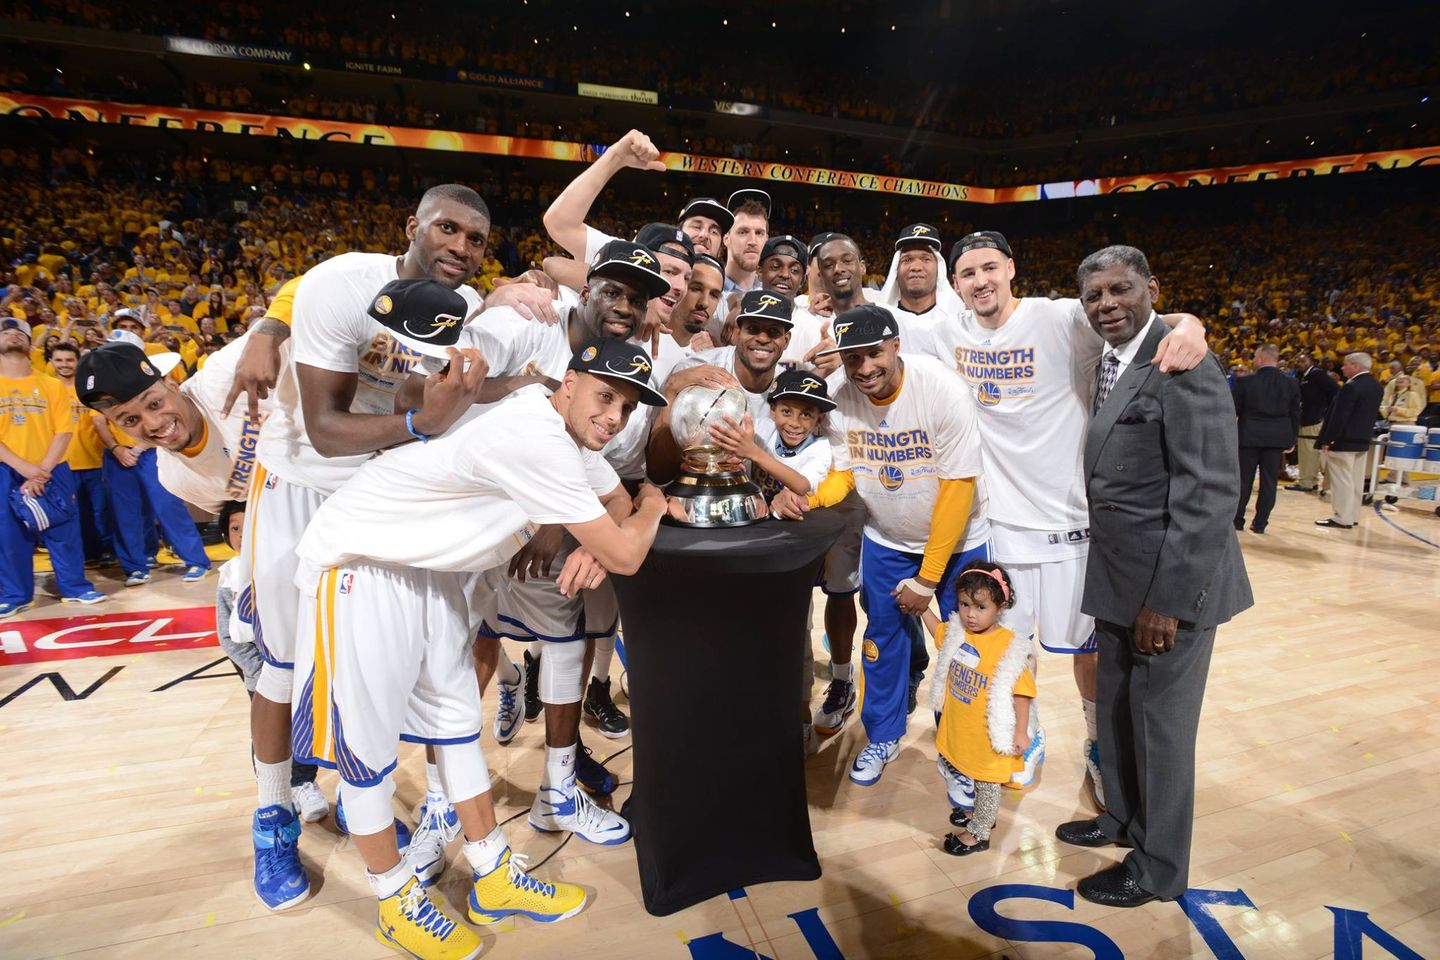 The Warriors Dynasty: Champions of the NBA in 2015